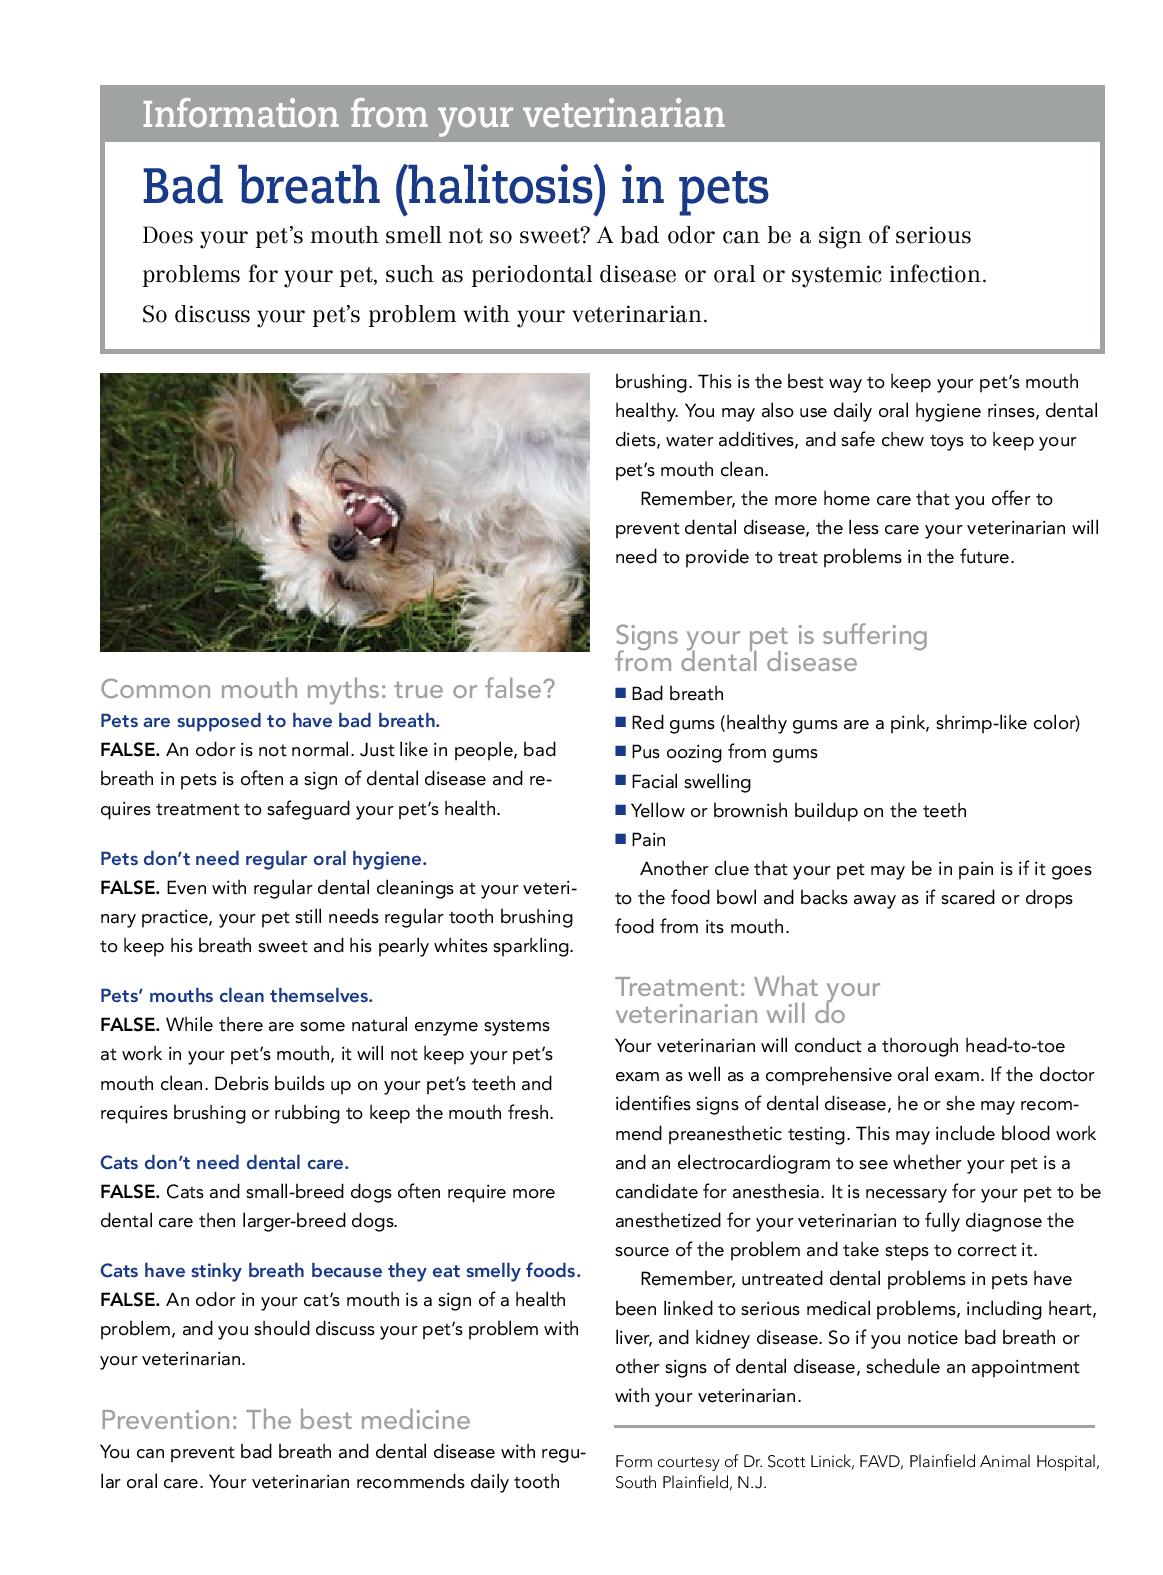 Bad Breath in Pets